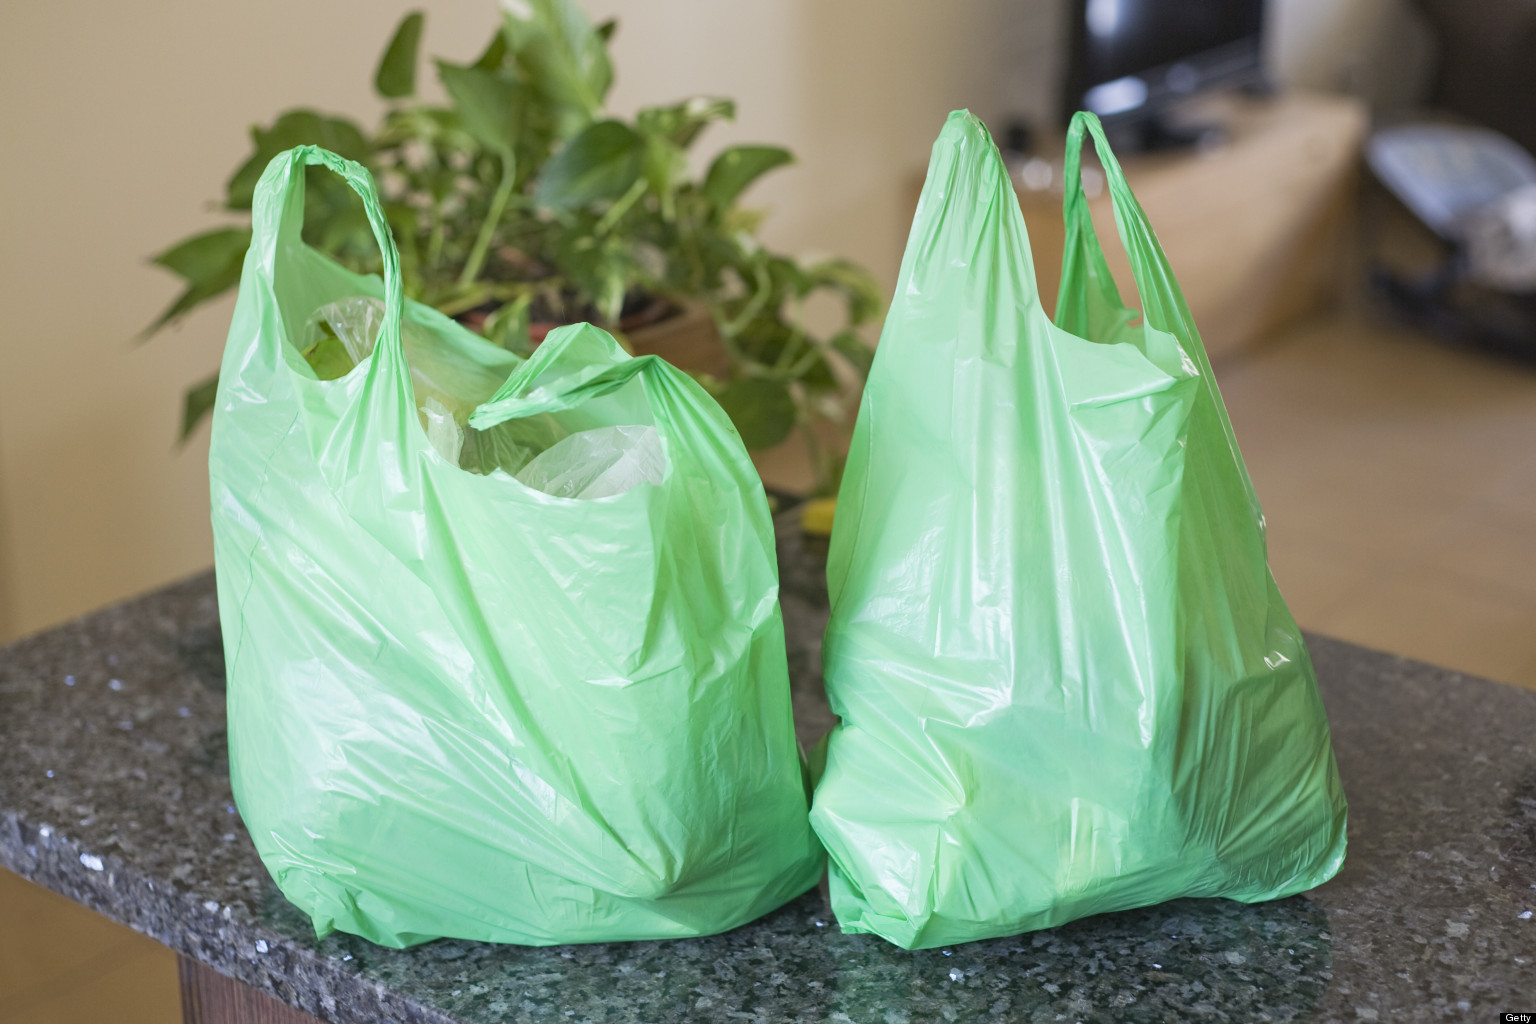 Why You Should Support the Plastic Bag Reduction Ordinance